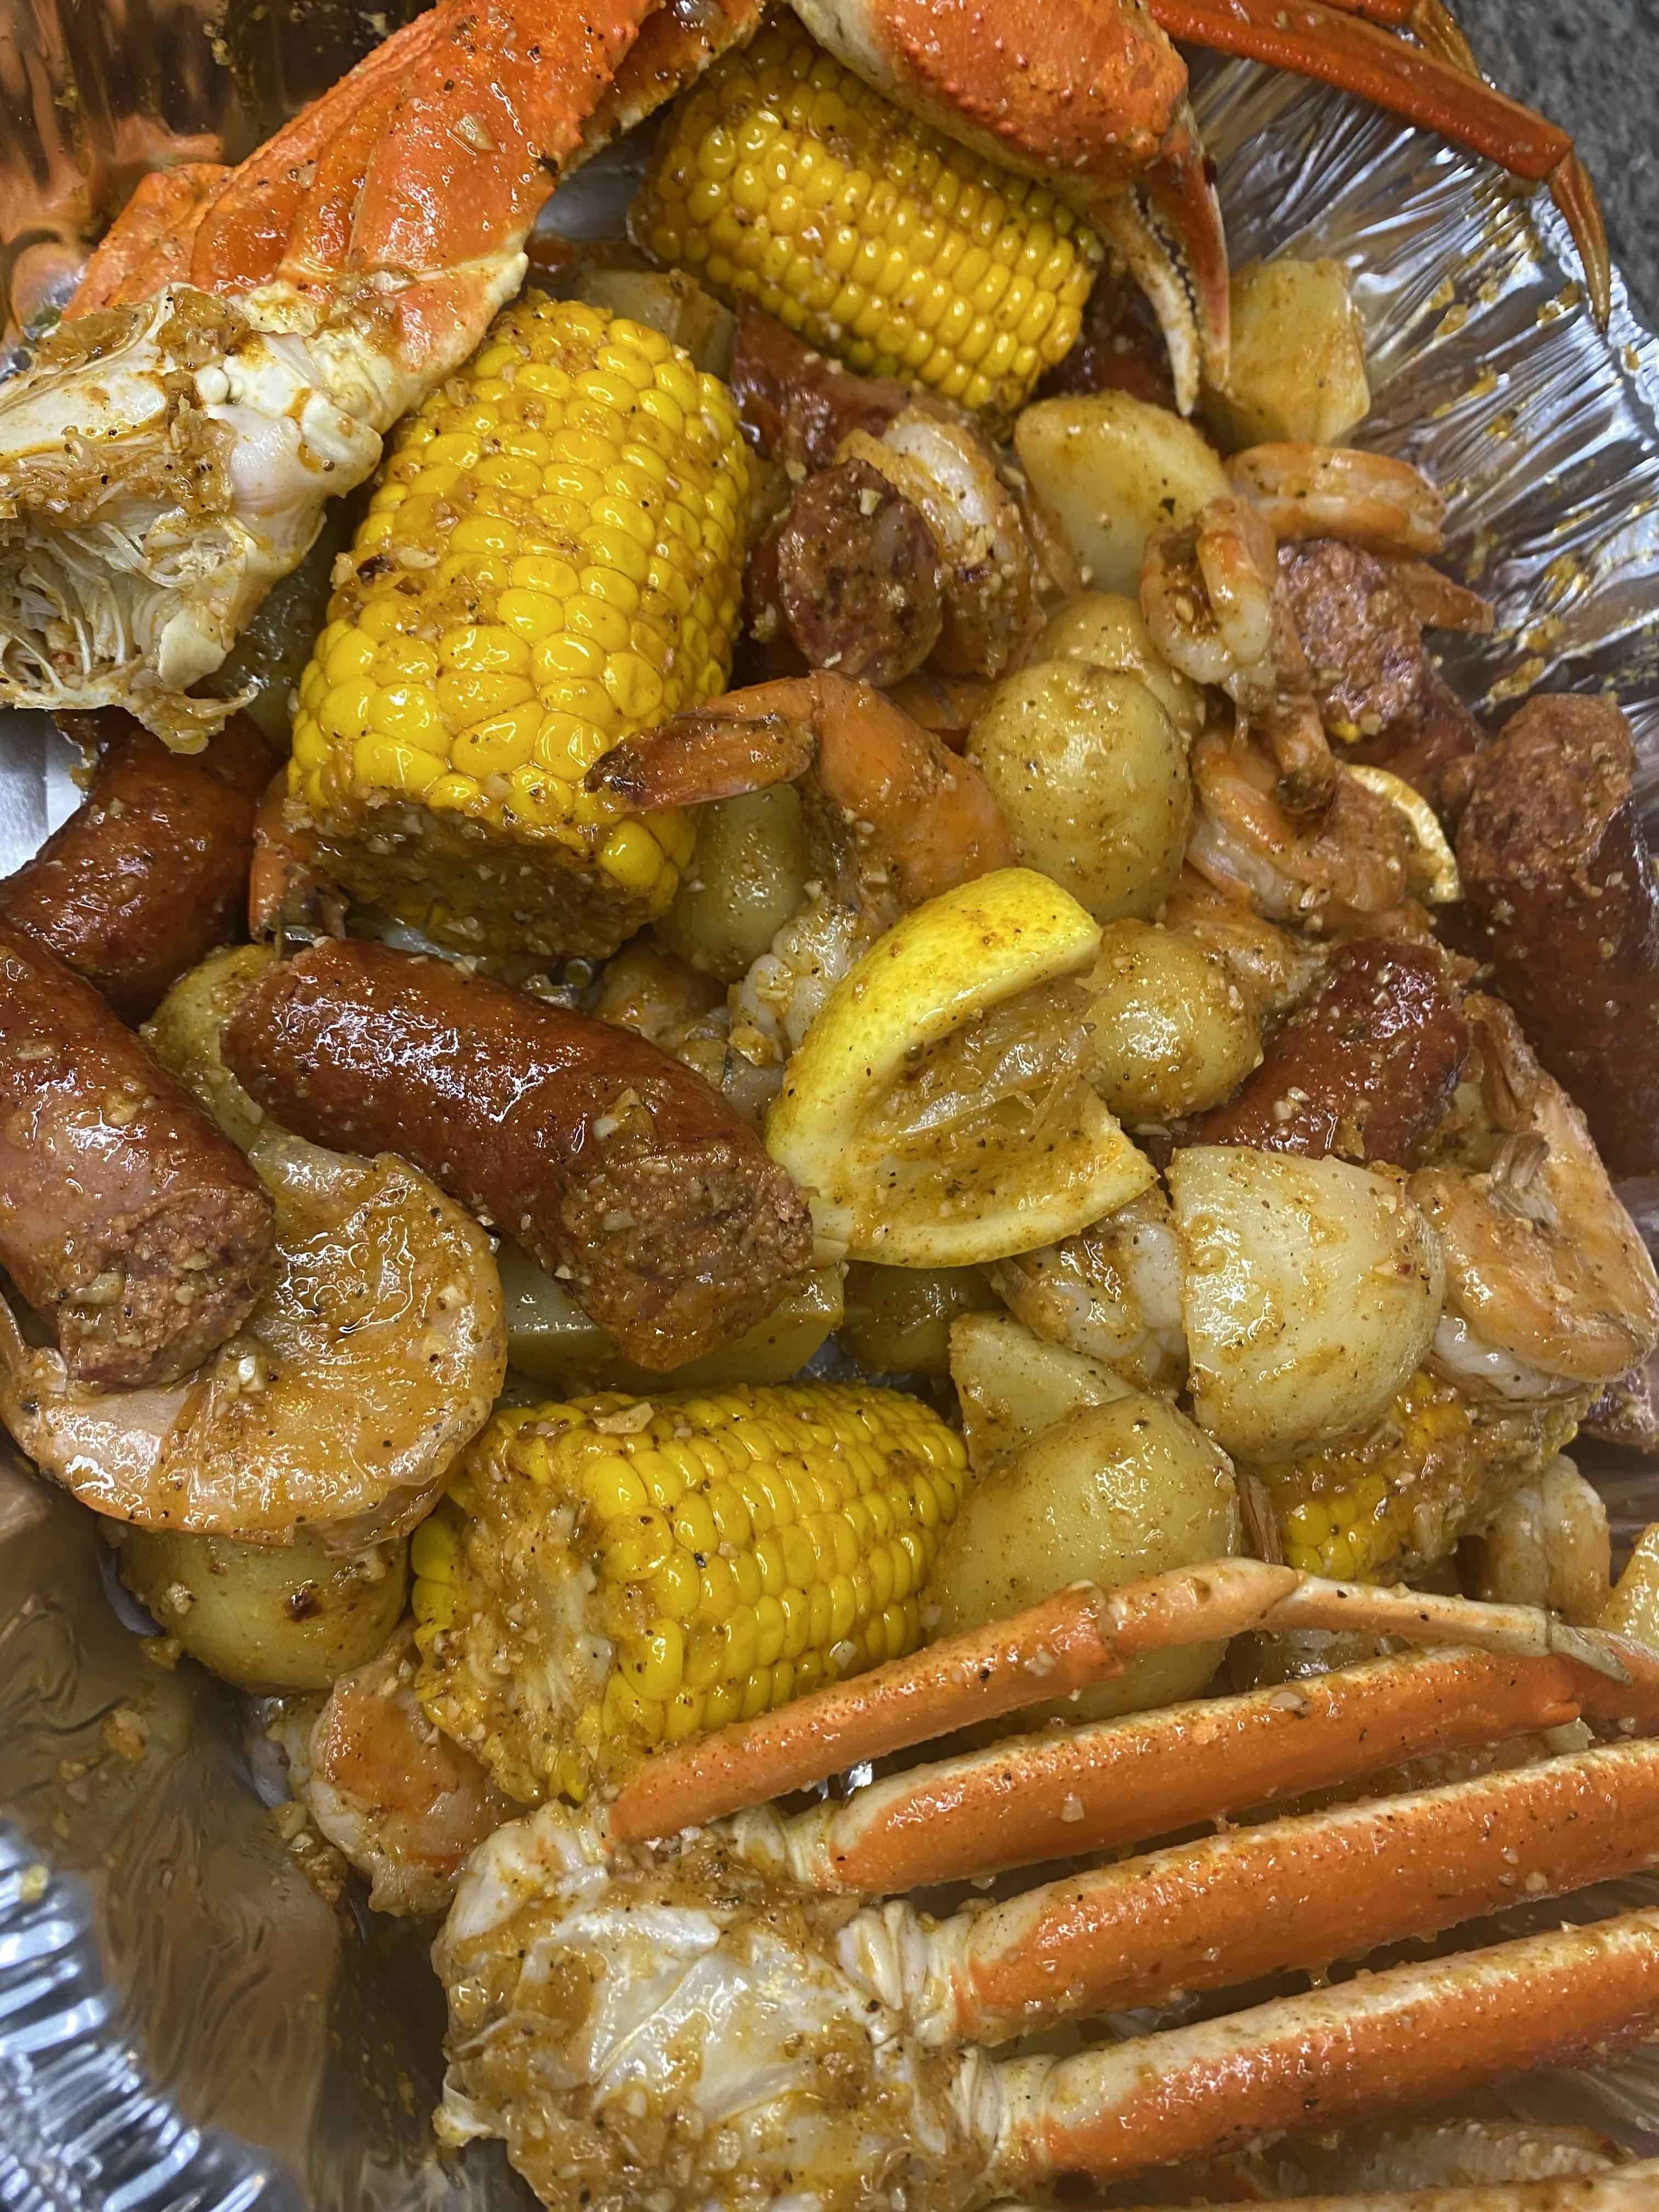 Picture for Seafood Boil @ Home